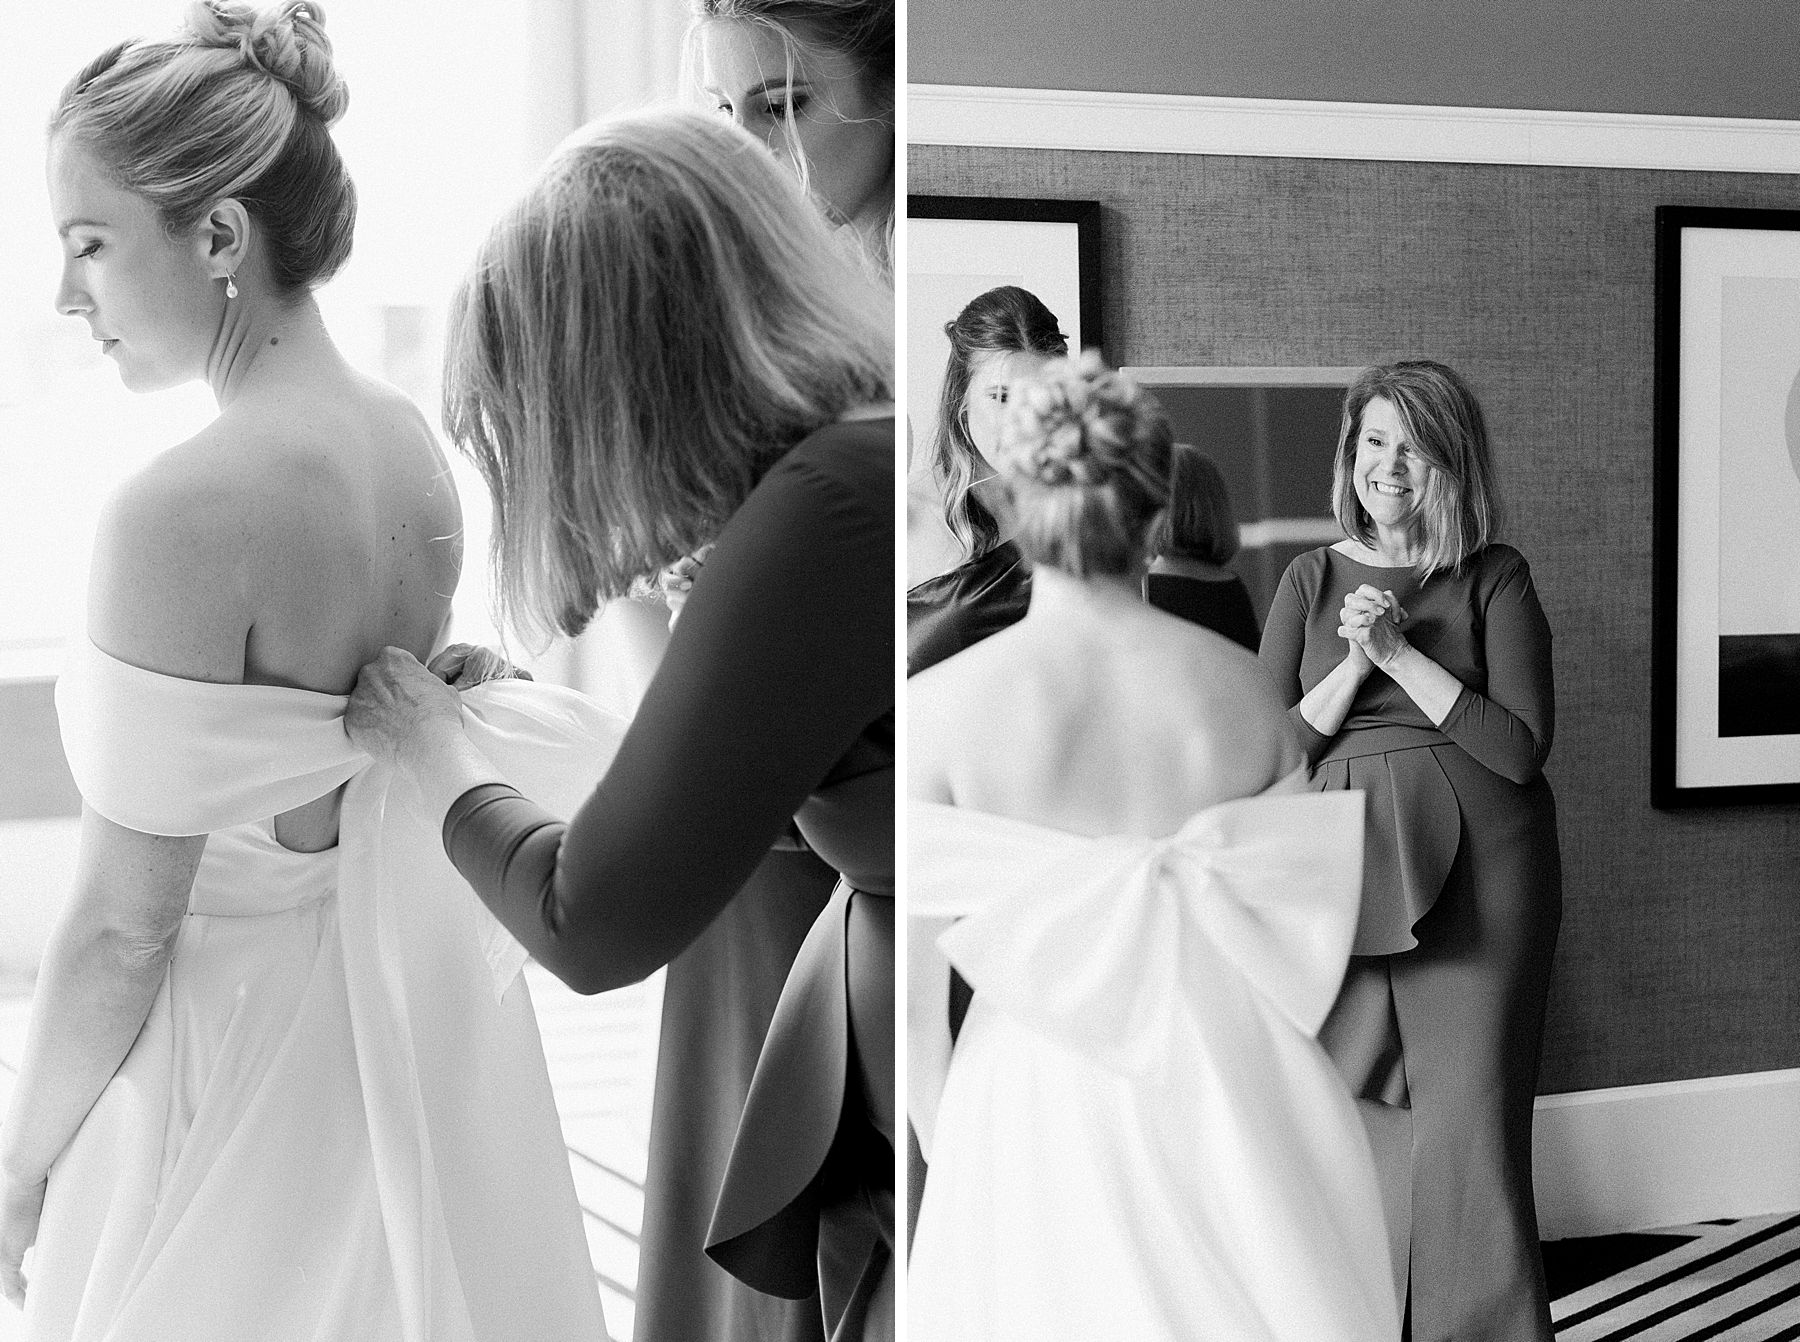 bride getting dressed in her bridal gown